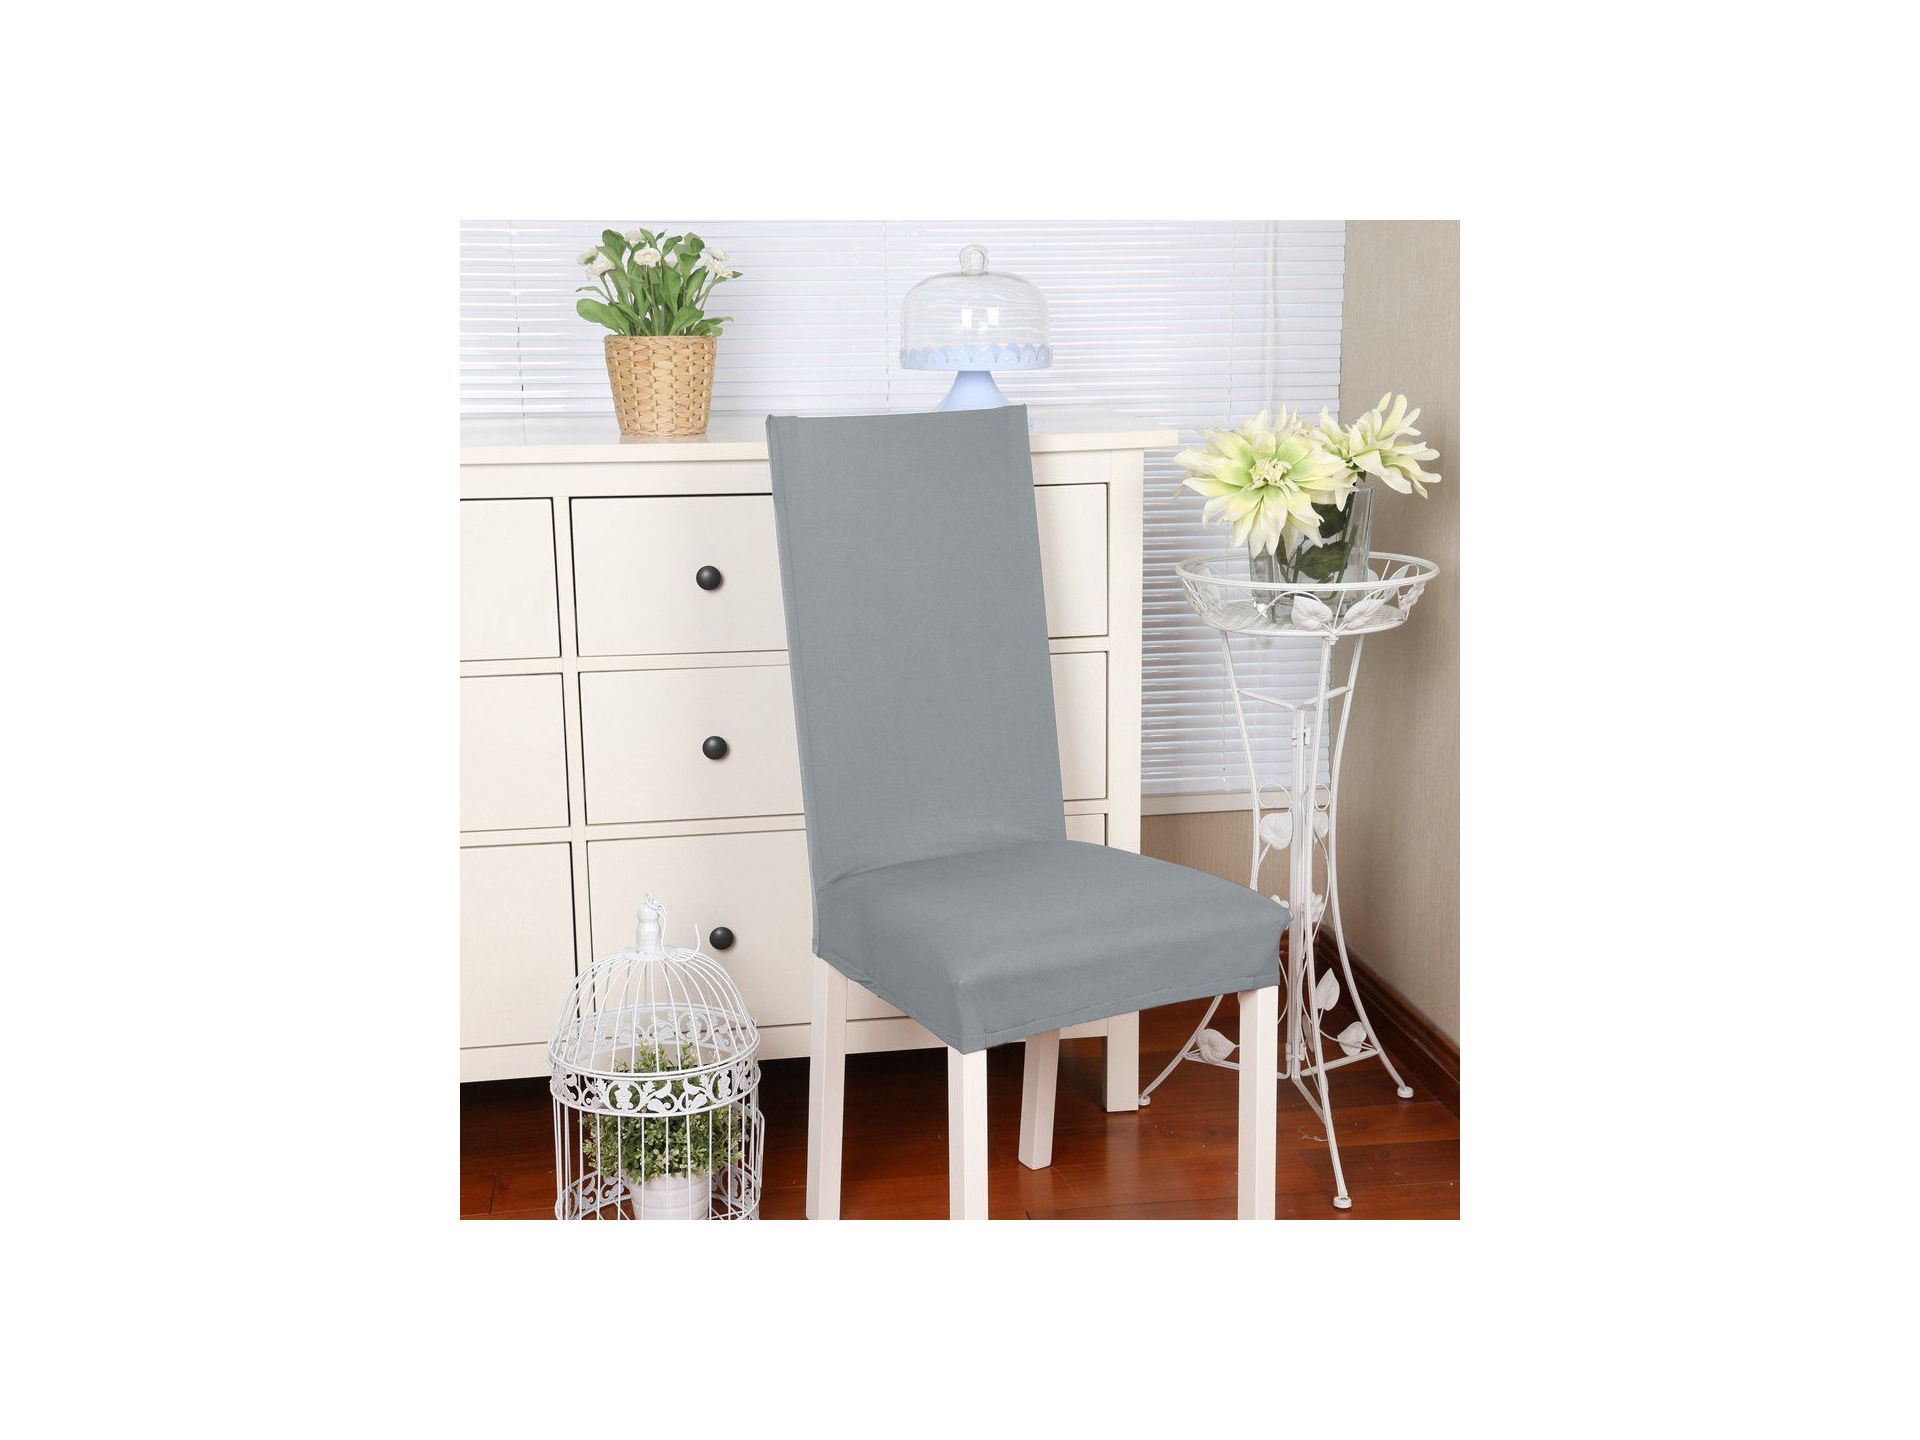 Dining Chair Cover - Set of 4 - Grey